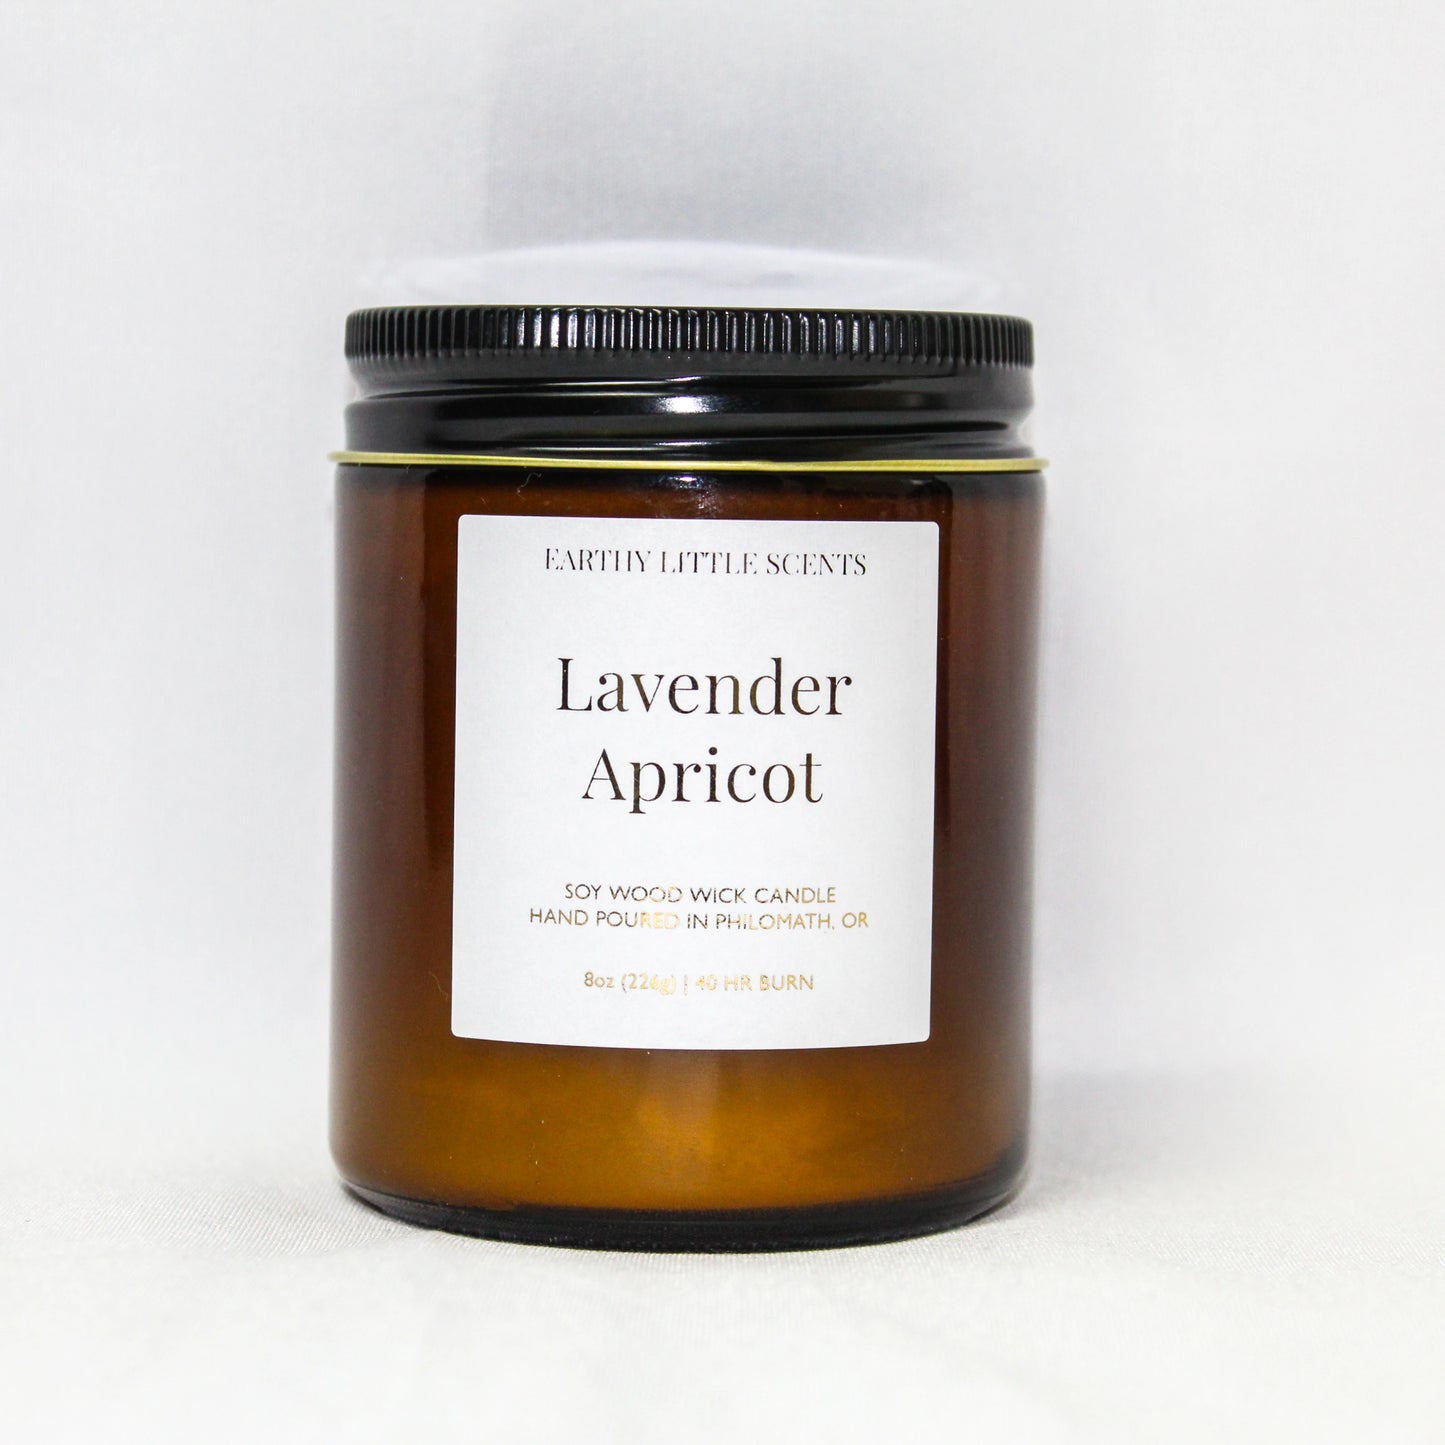 Lavender Apricot Soy Wood Wick Candle